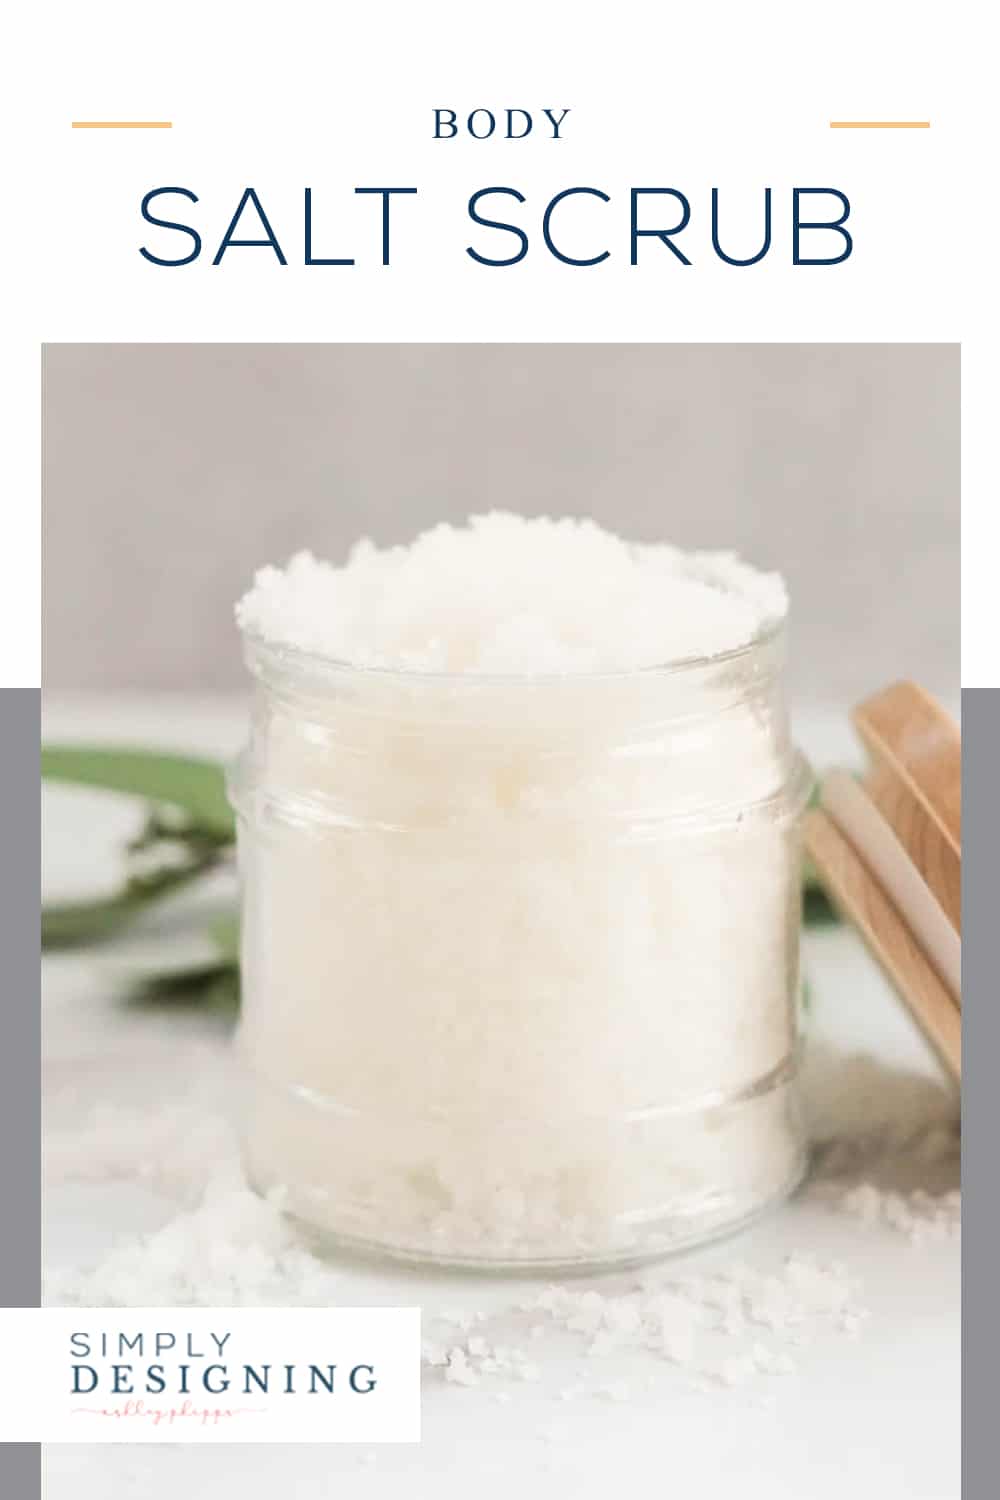 I absolutely love body scrubs and this Salt Scrub with a delicious yet natural smell makes scrubbing and exfoliating so amazing and easy